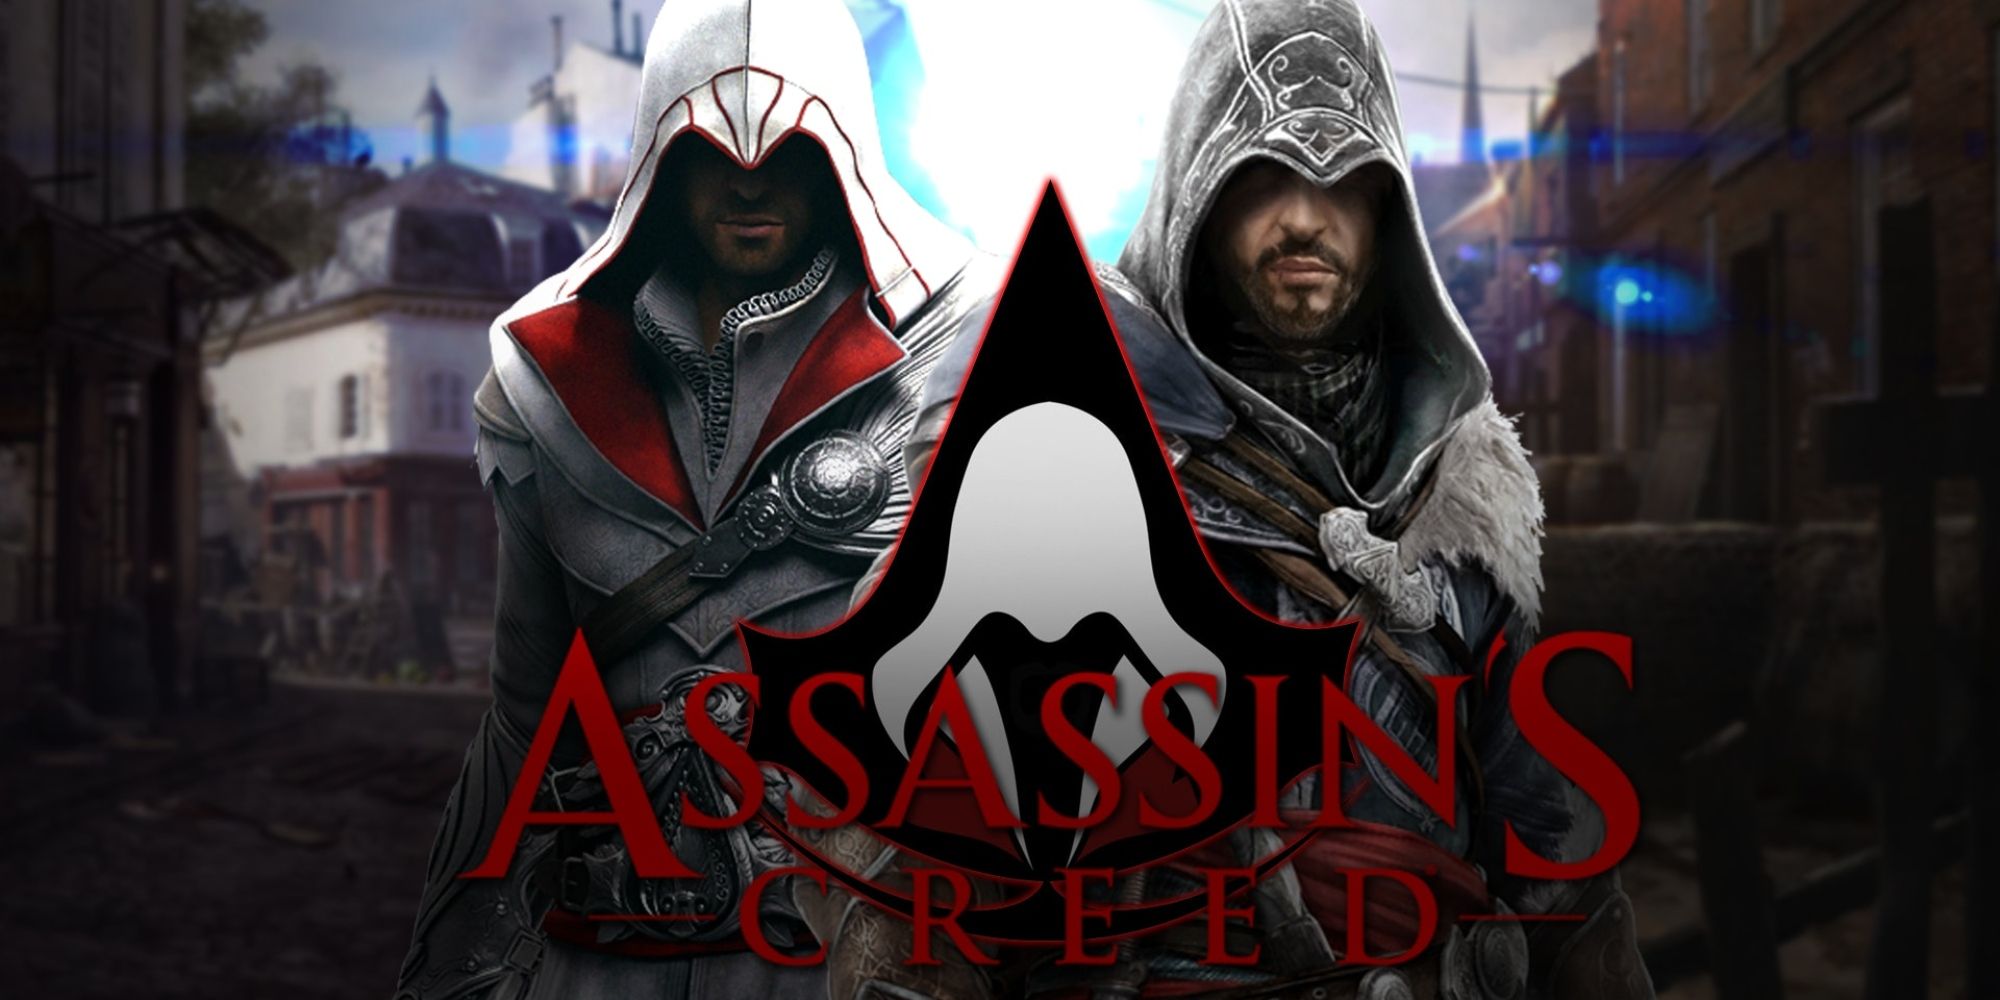 assassins creed game free download full version for pc windows 10